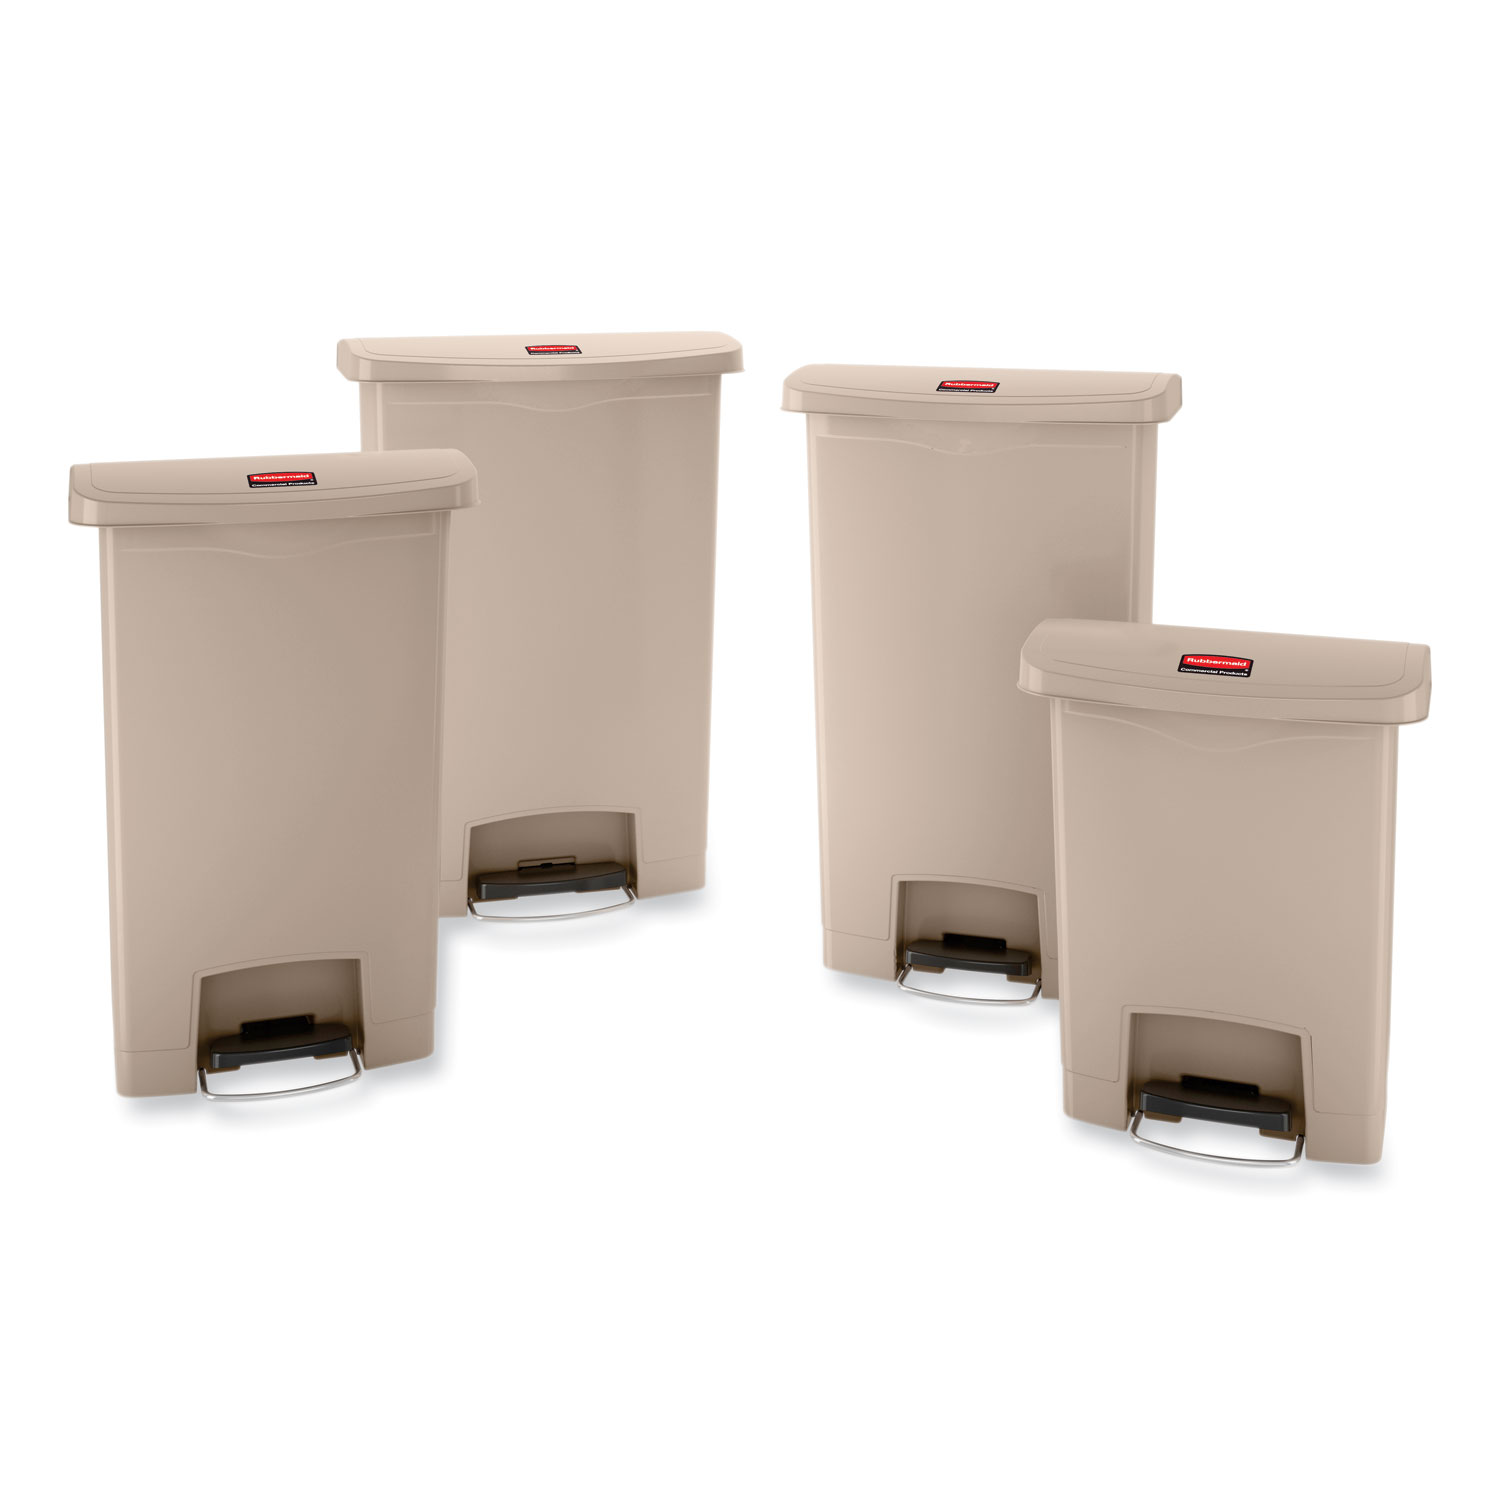 Rubbermaid Slim Jim Container 13 Gallon End Step-On Beige Resin